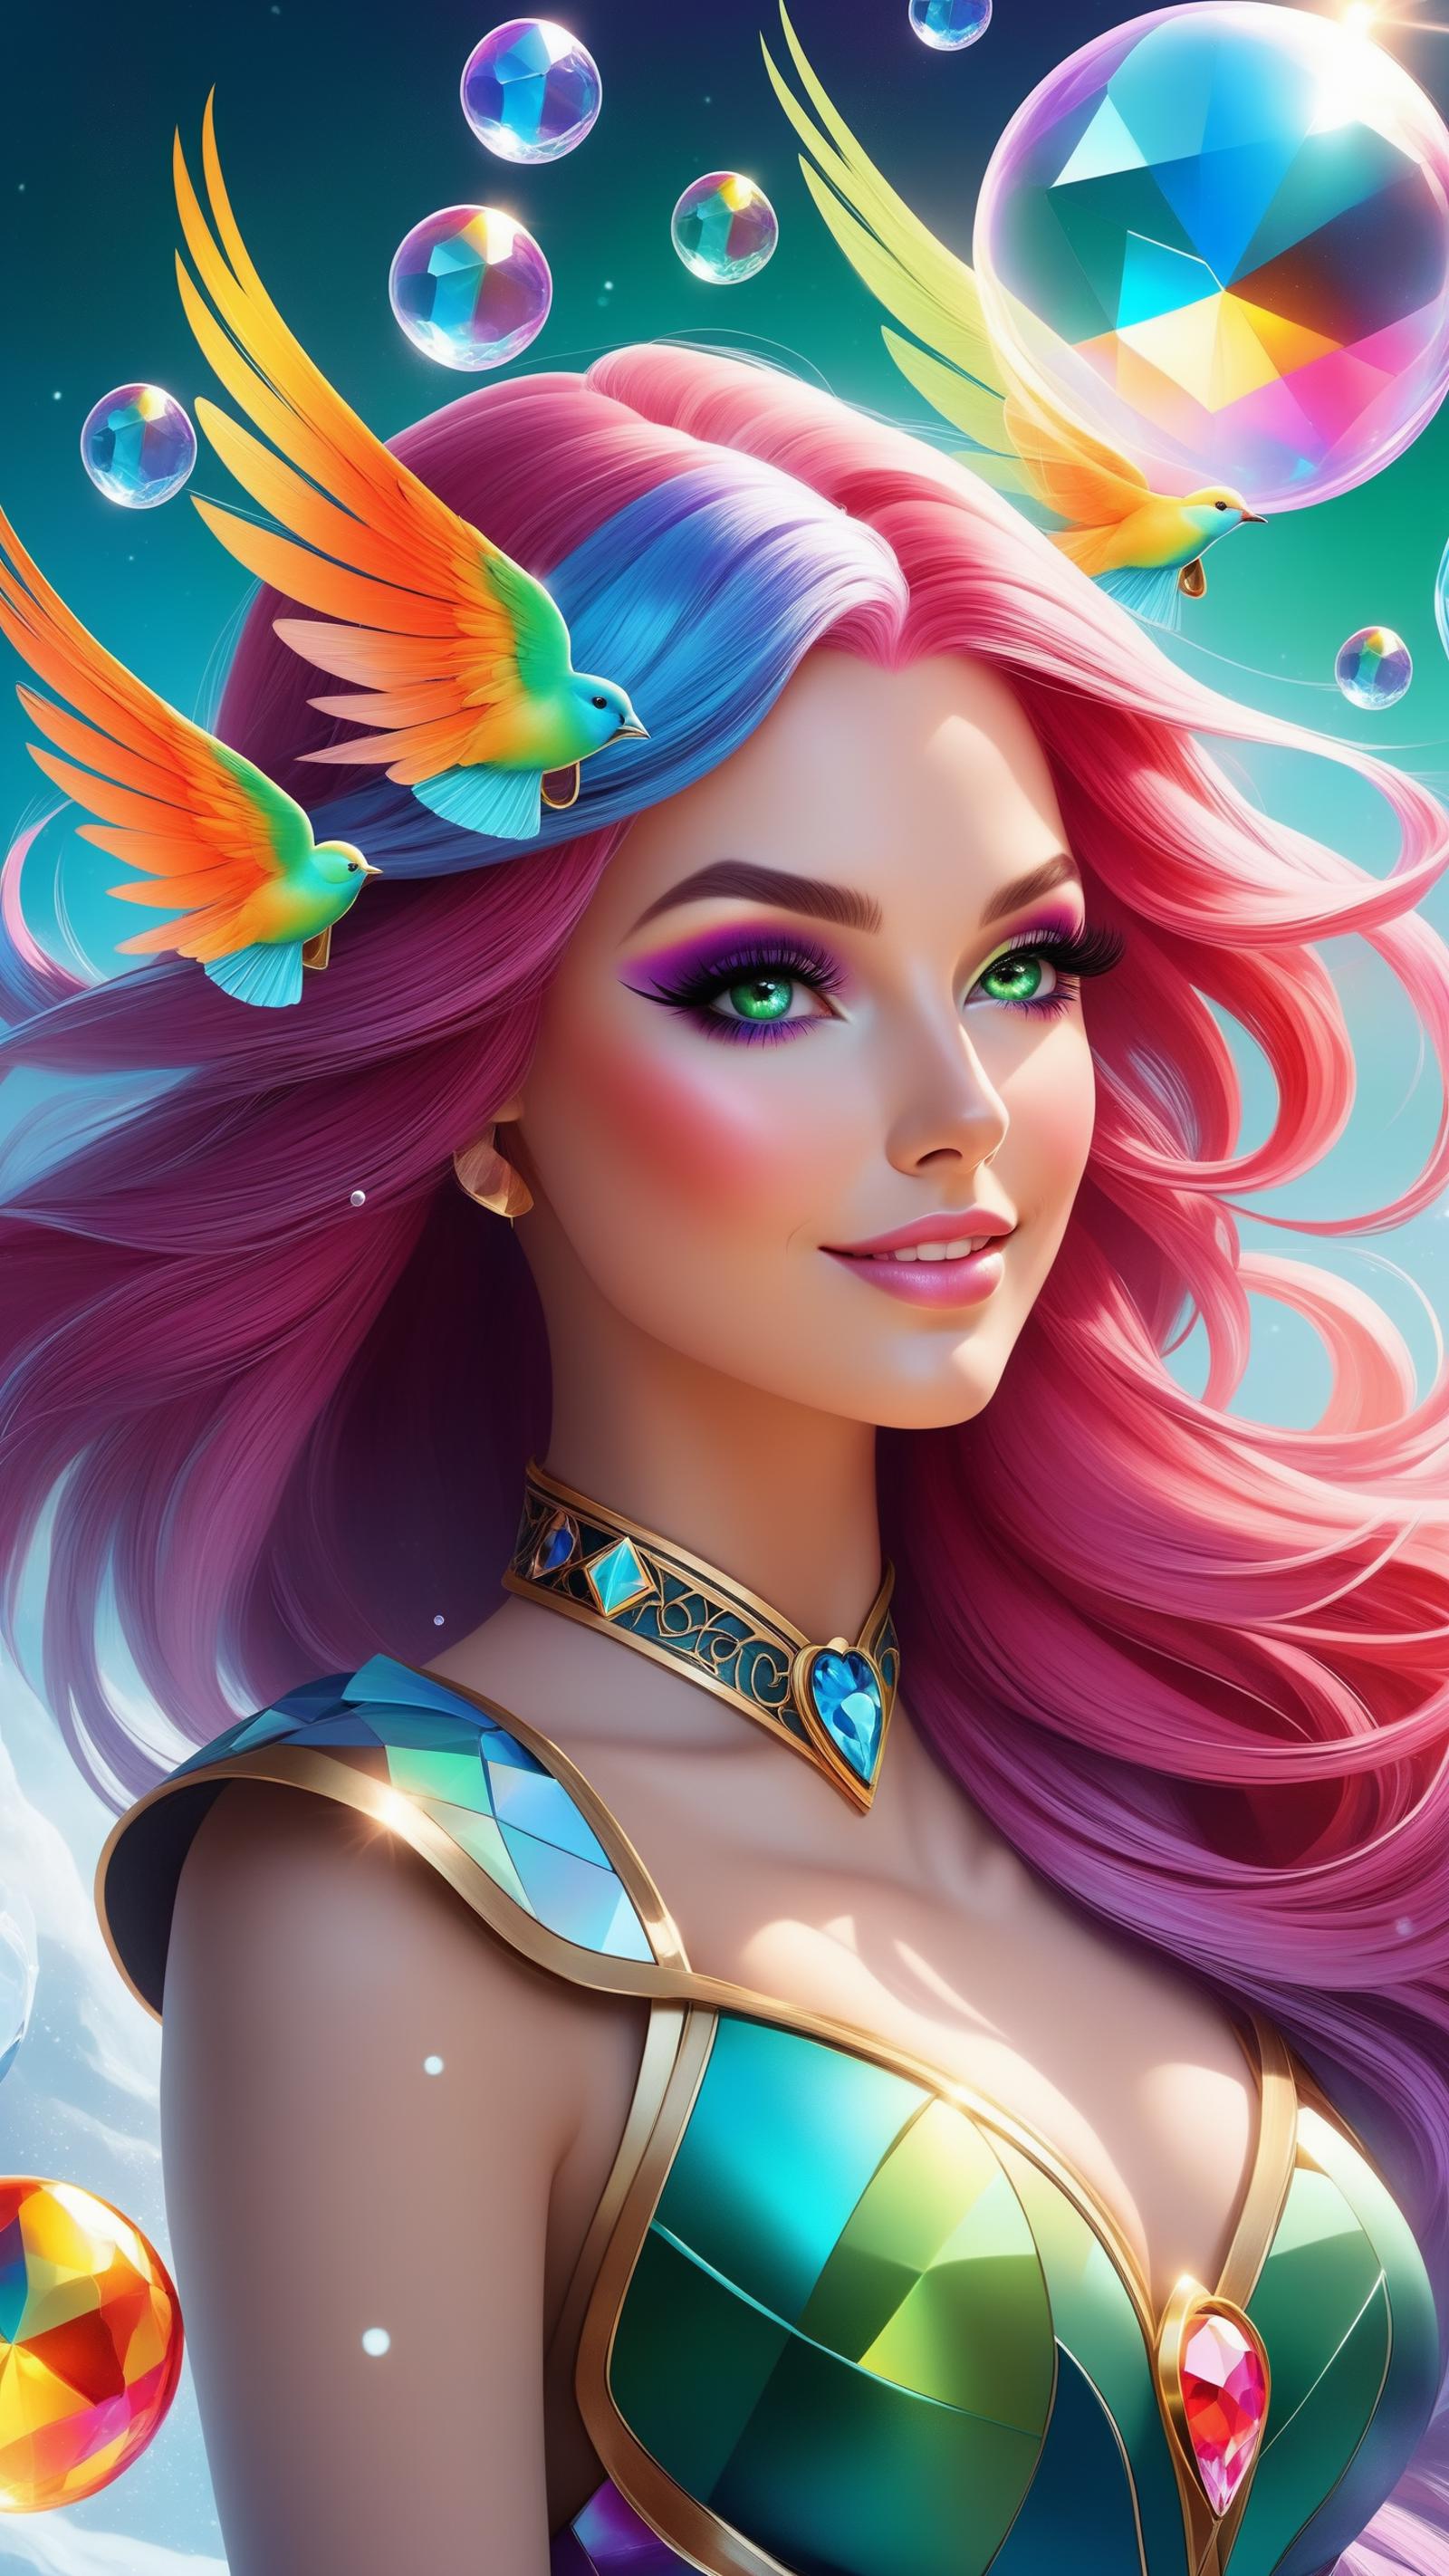 Pink-haired cartoon girl wearing a gold necklace and a blue gem.